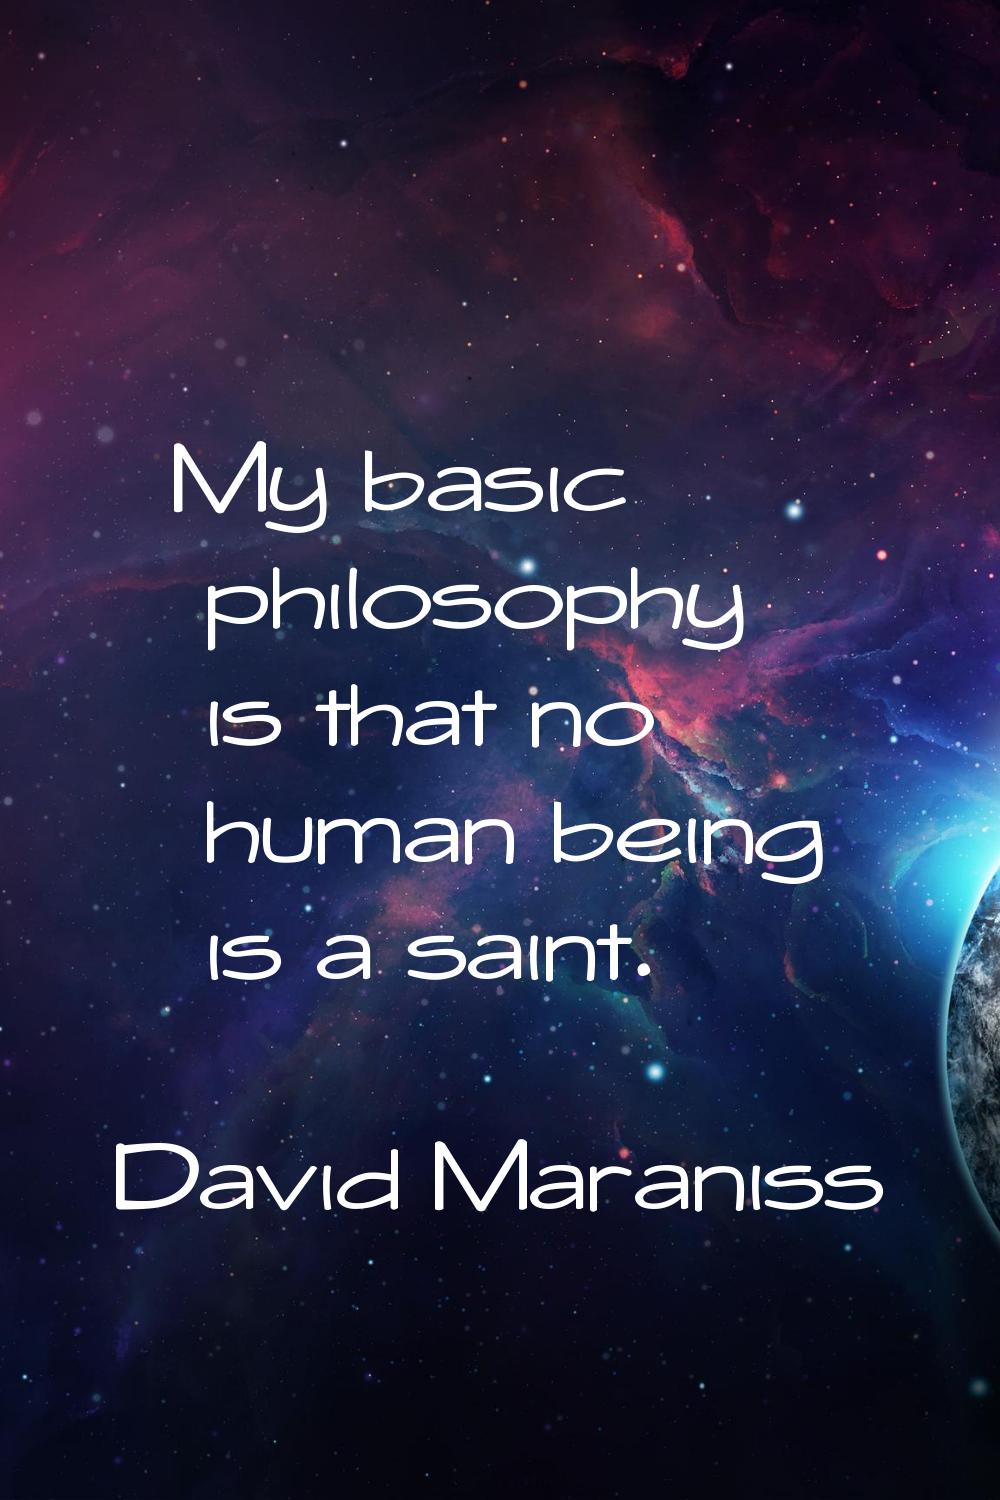 My basic philosophy is that no human being is a saint.